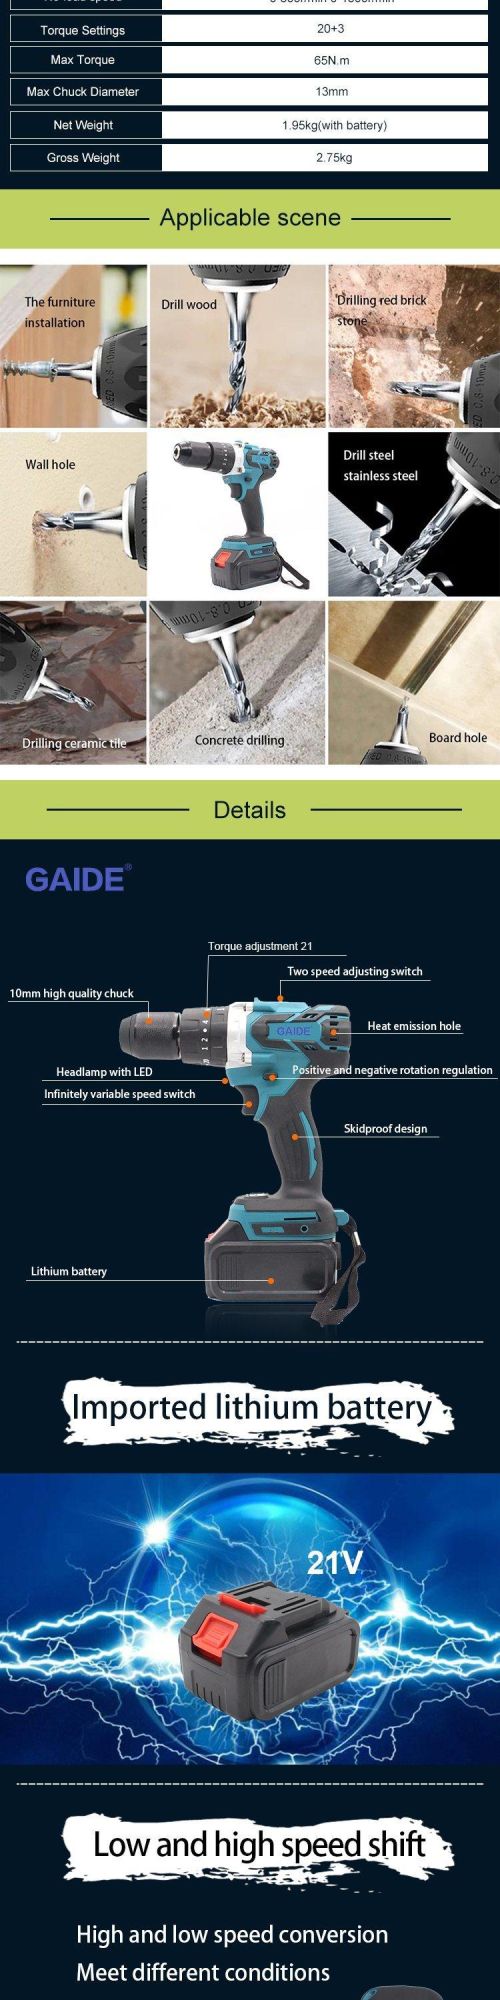 Gaide Electric Nail Cordless Drilling Machines with Two Battery Low Price